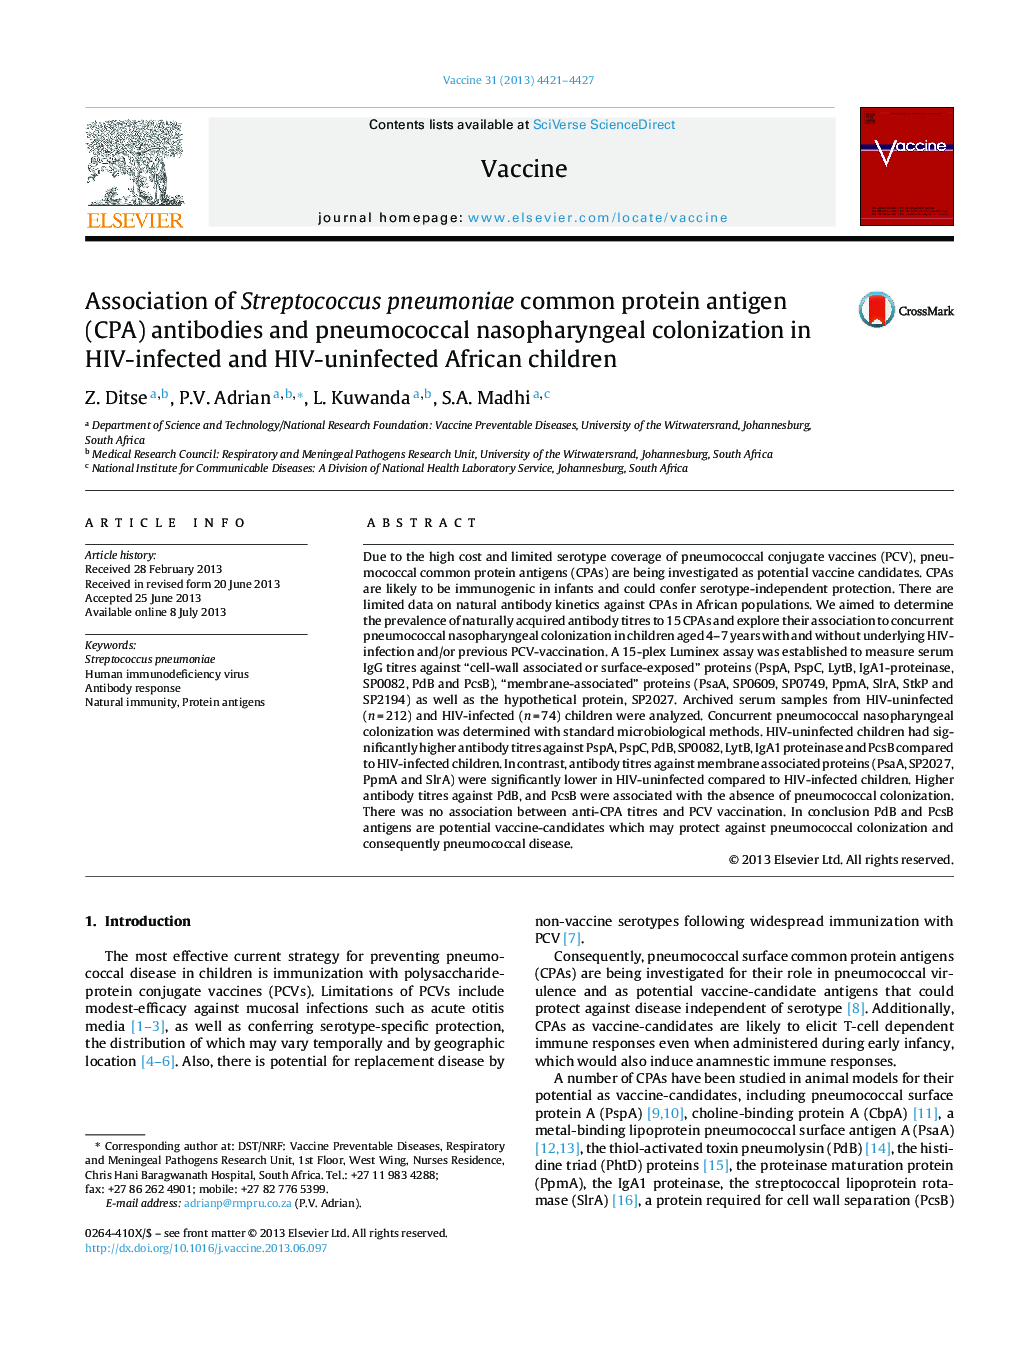 Association of Streptococcus pneumoniae common protein antigen (CPA) antibodies and pneumococcal nasopharyngeal colonization in HIV-infected and HIV-uninfected African children